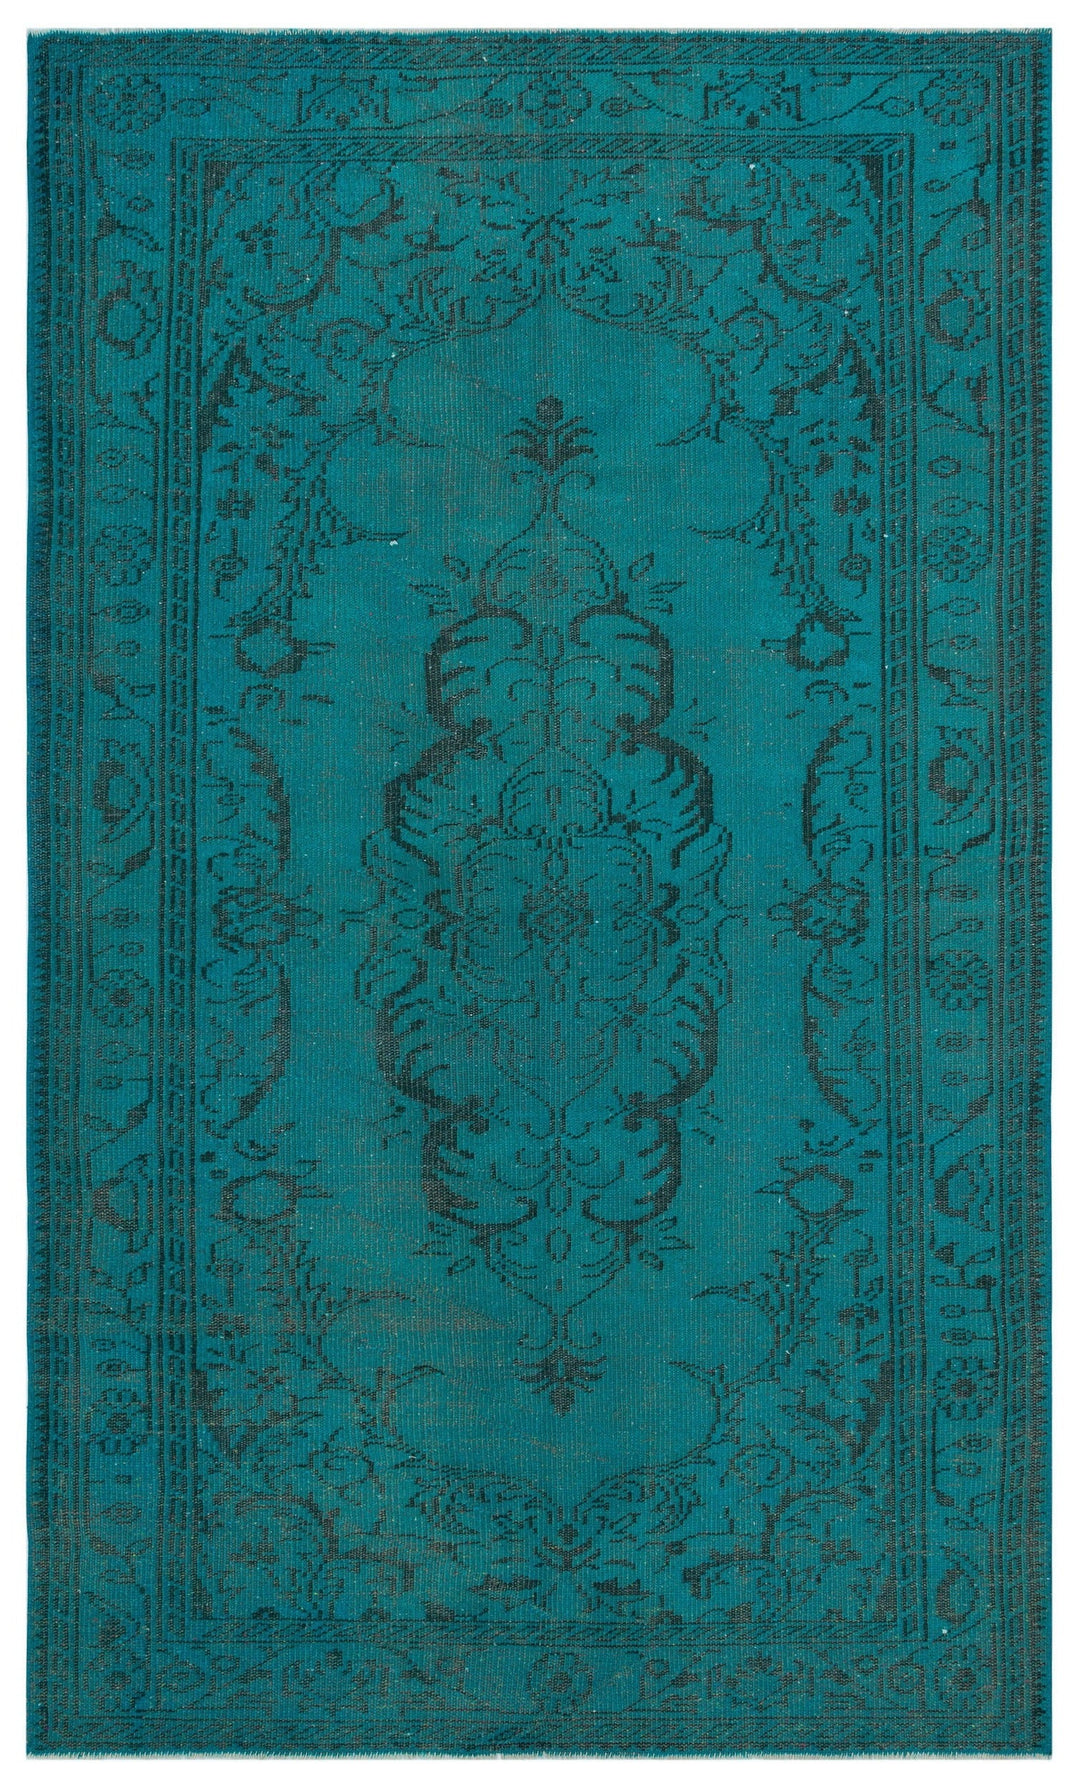 Athens Turquoise Tumbled Wool Hand Woven Carpet 156 x 263